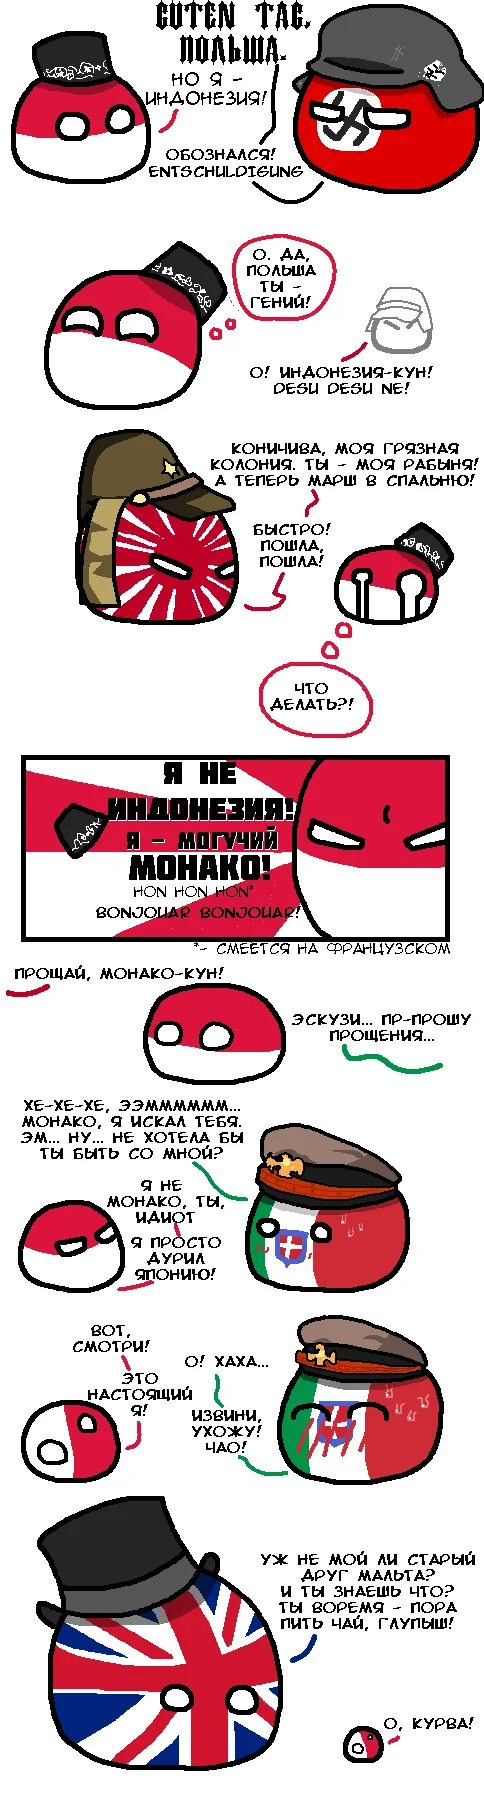 Adventures of Poland - Countryballs, Comics, Picture with text, Politics, Poland, Great Britain, Italy, Japan, Germany, Monaco, Indonesia, Telegram (link), VKontakte (link), Longpost